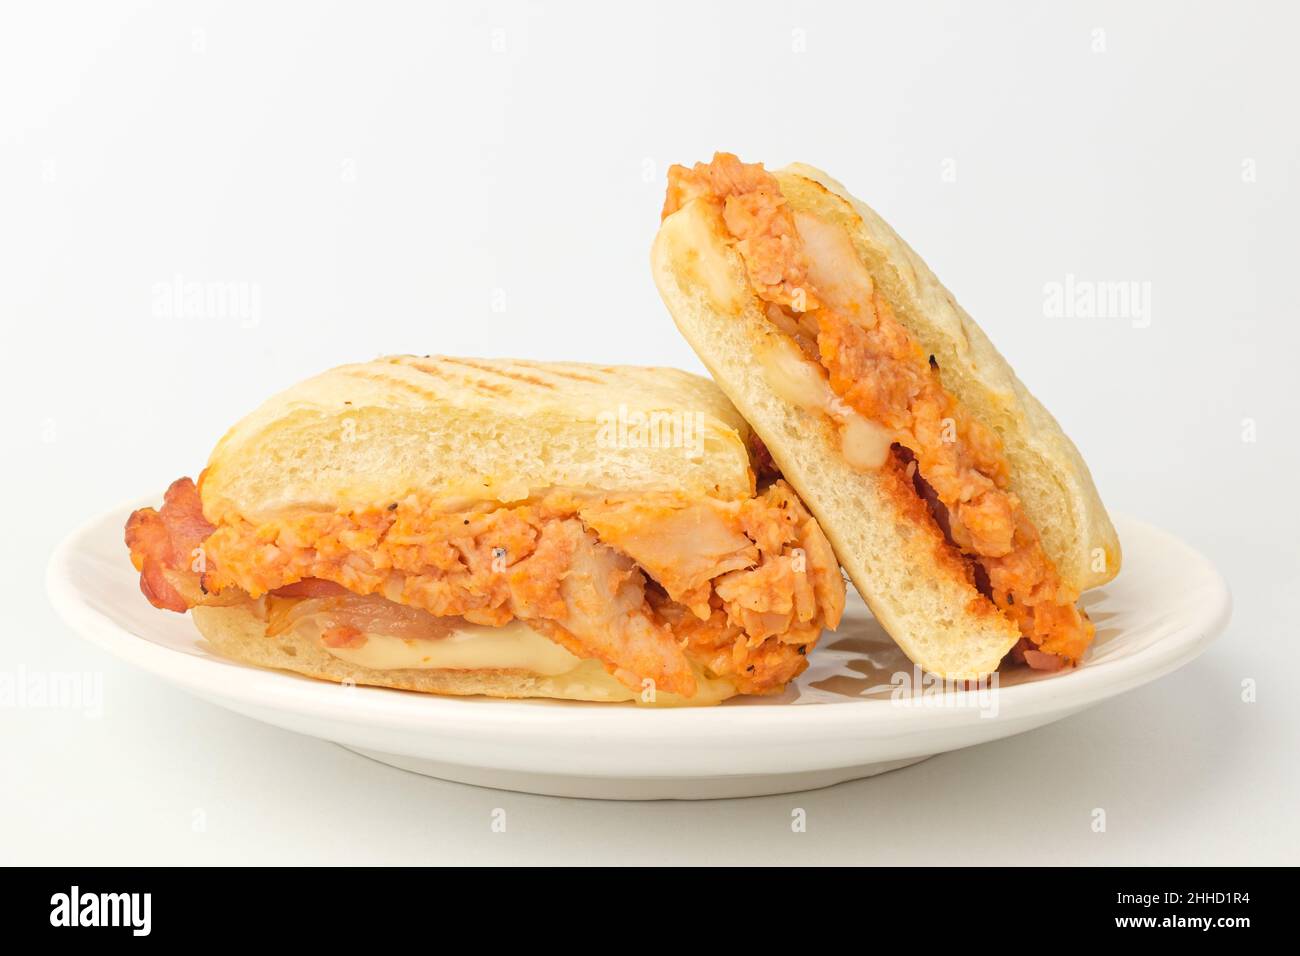 Sandwich with chicken. Bread with bacon. Bread with cheese Stock Photo